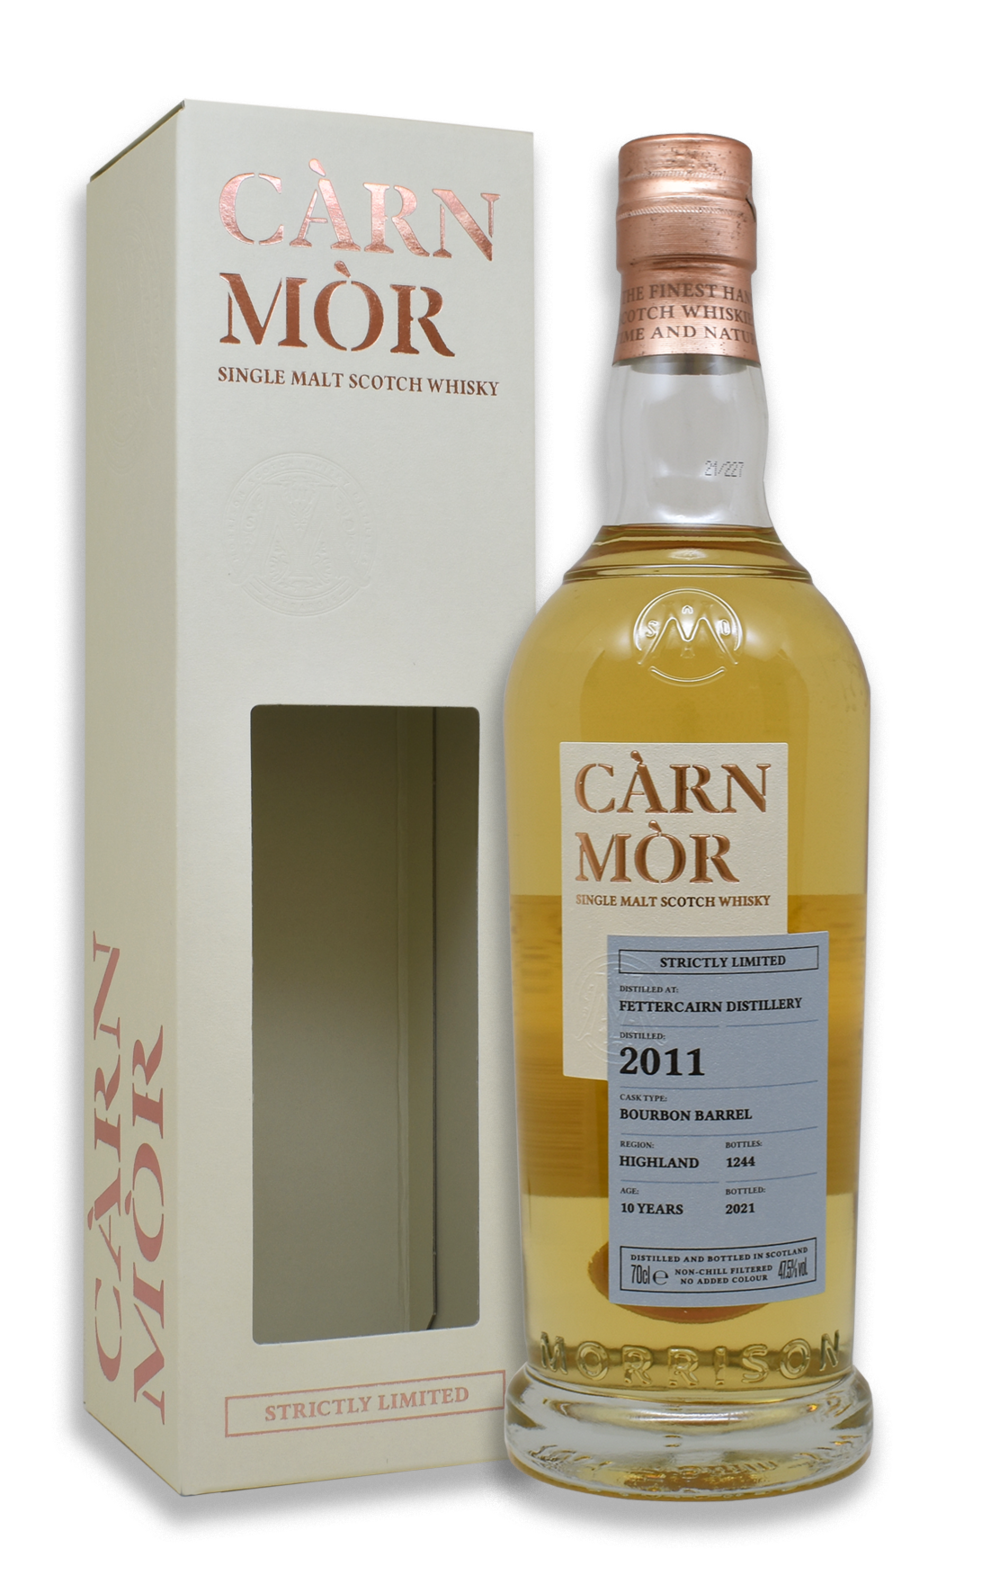 Fettercairn 10 Year Old 2011 - Strictly Limited (Carn Mor)